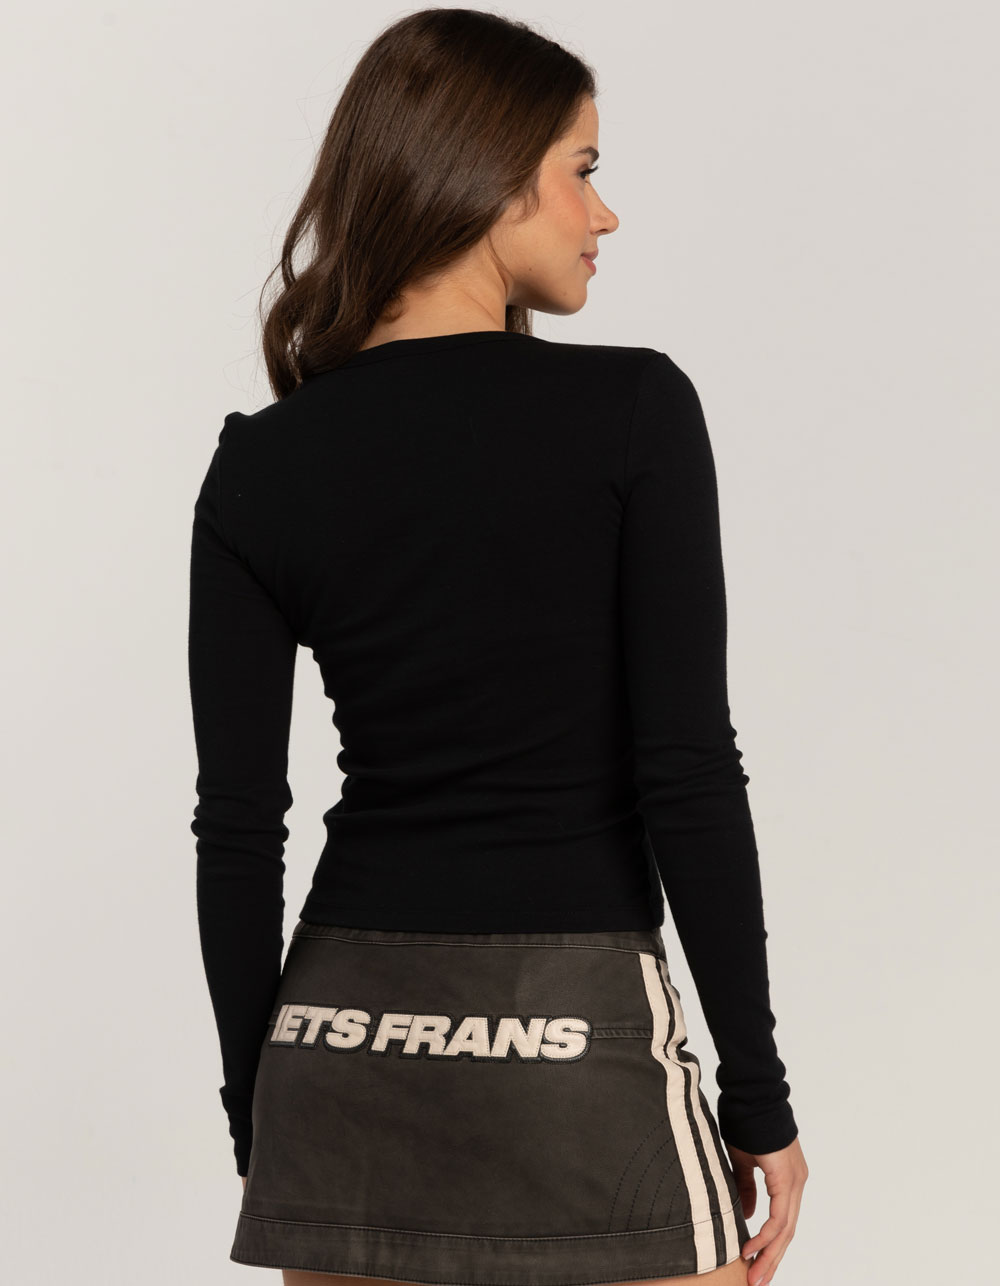 IETS FRANS Washed Womens Long Sleeve Baby Tee - BLACK | Tillys